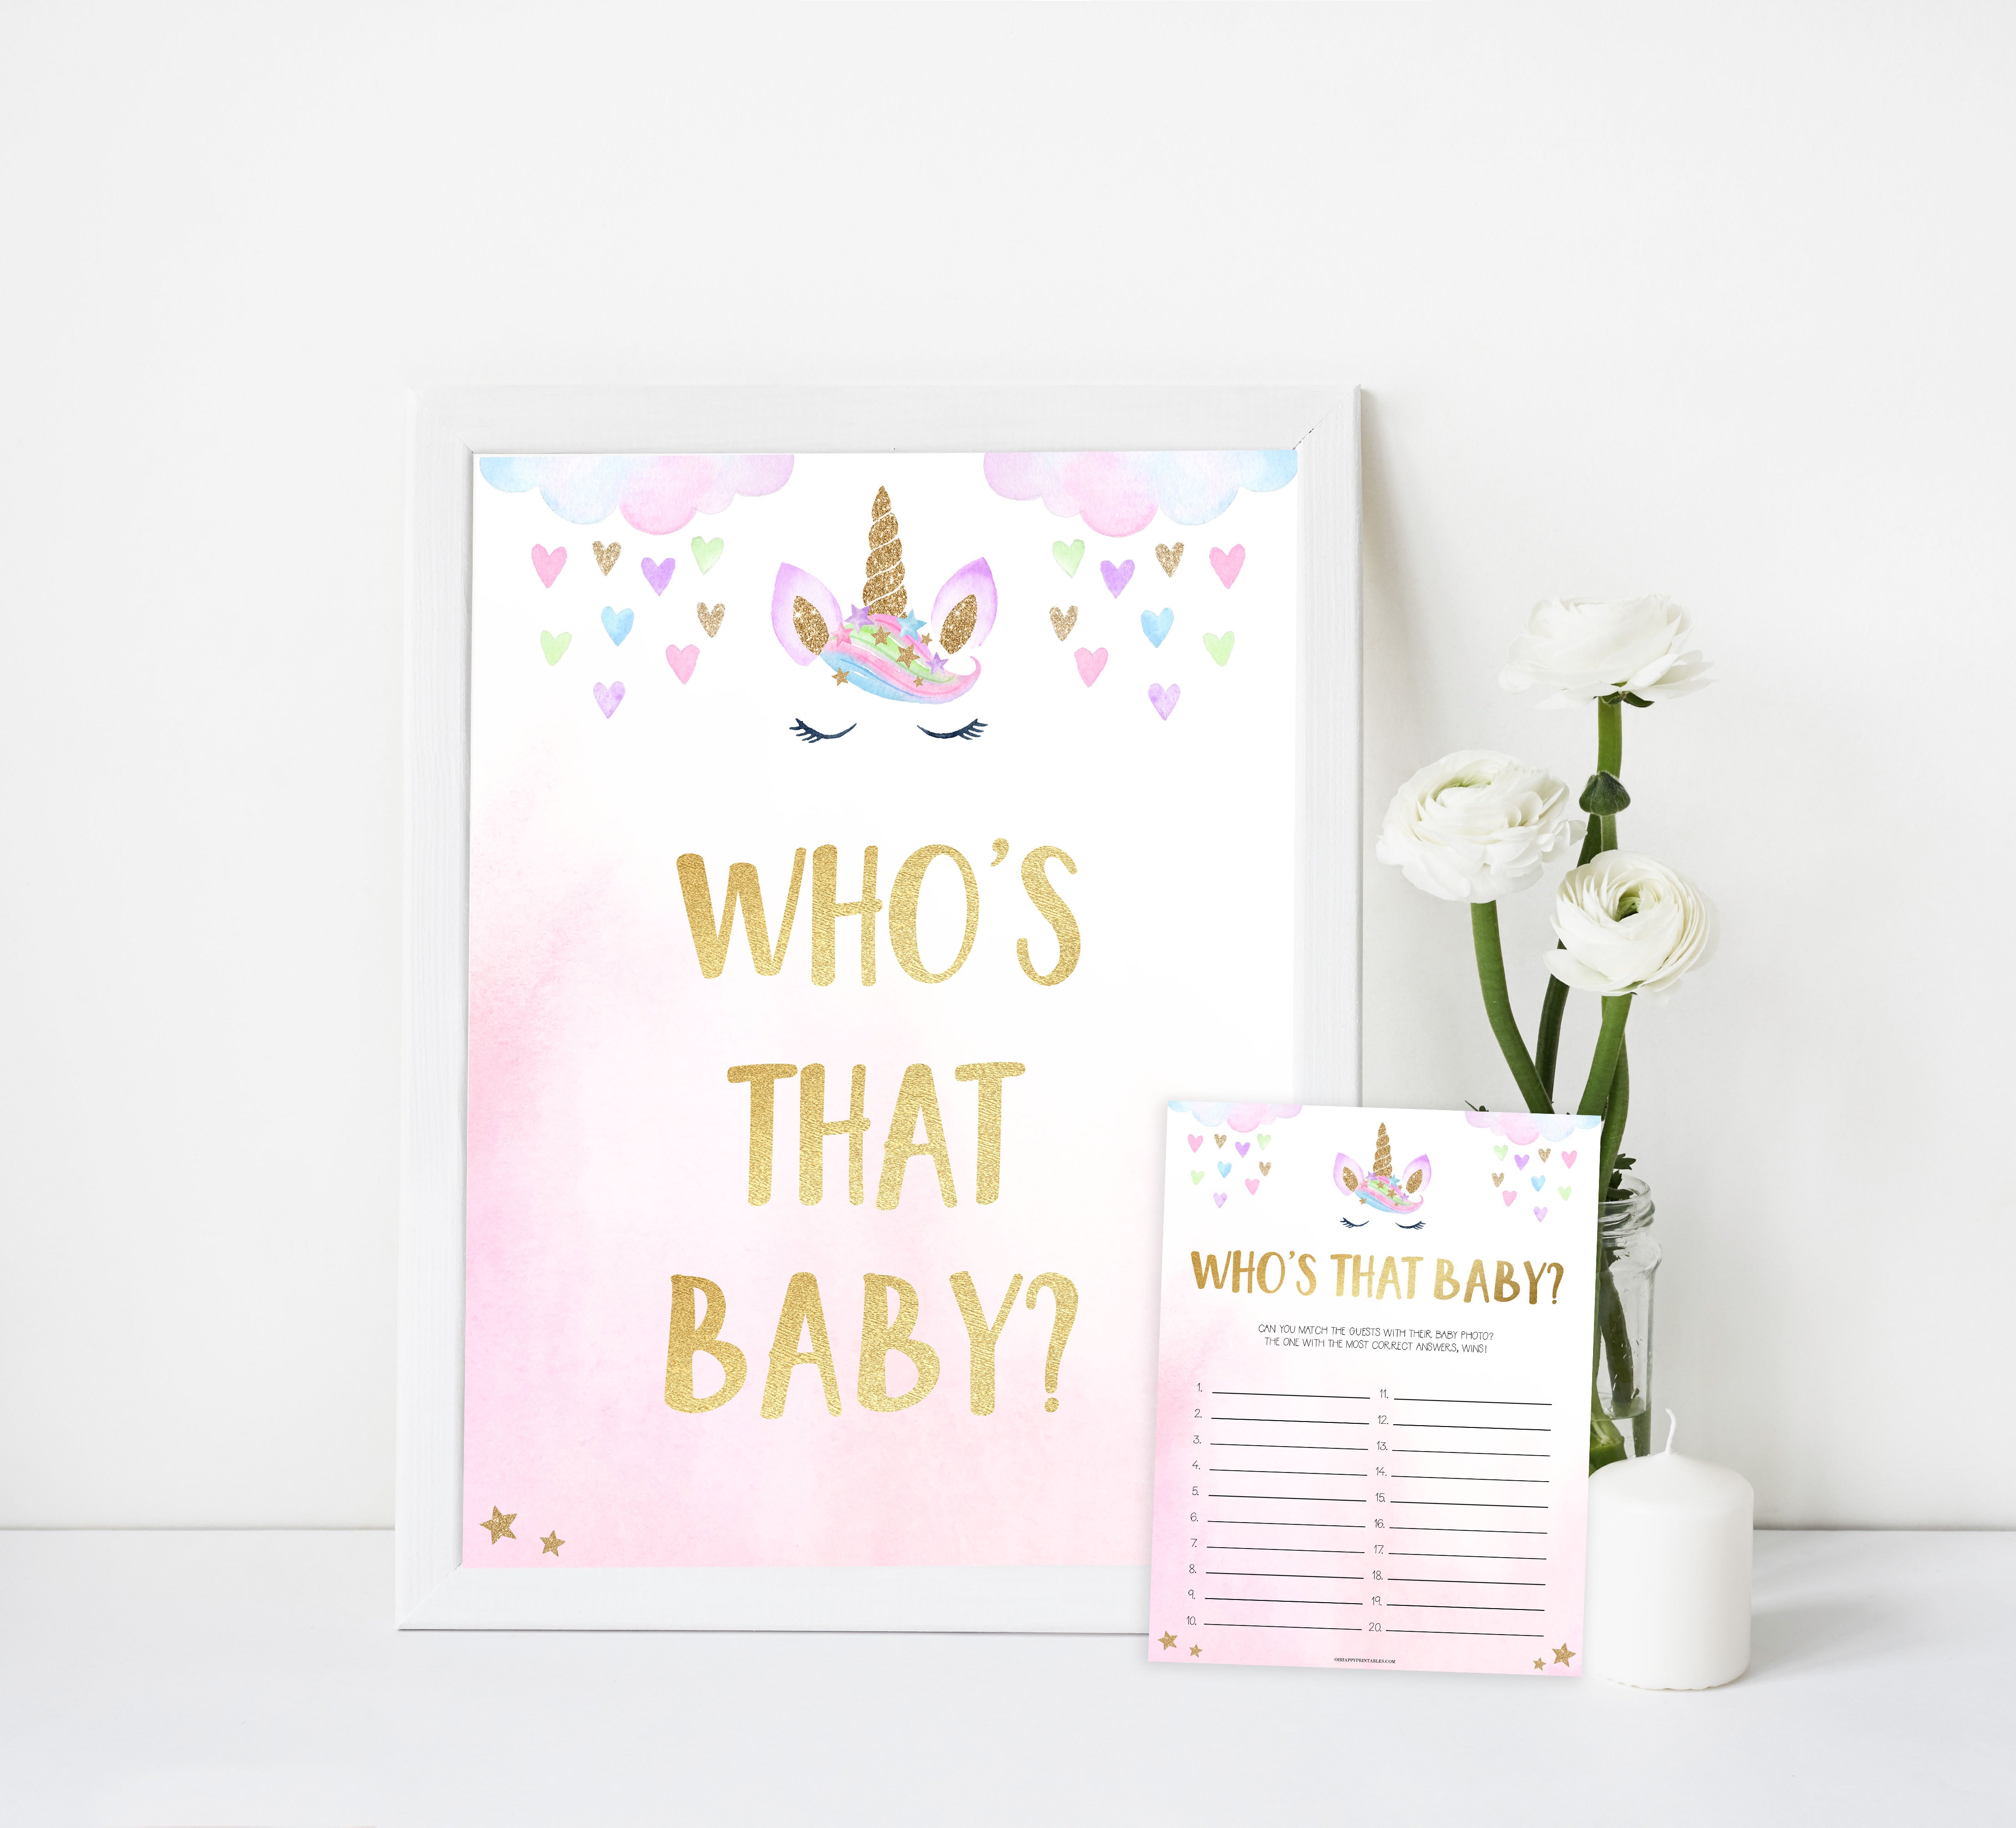 whos that baby game, whos that baby, Printable baby shower games, unicorn baby games, baby shower games, fun baby shower ideas, top baby shower ideas, unicorn baby shower, baby shower games, fun unicorn baby shower ideas